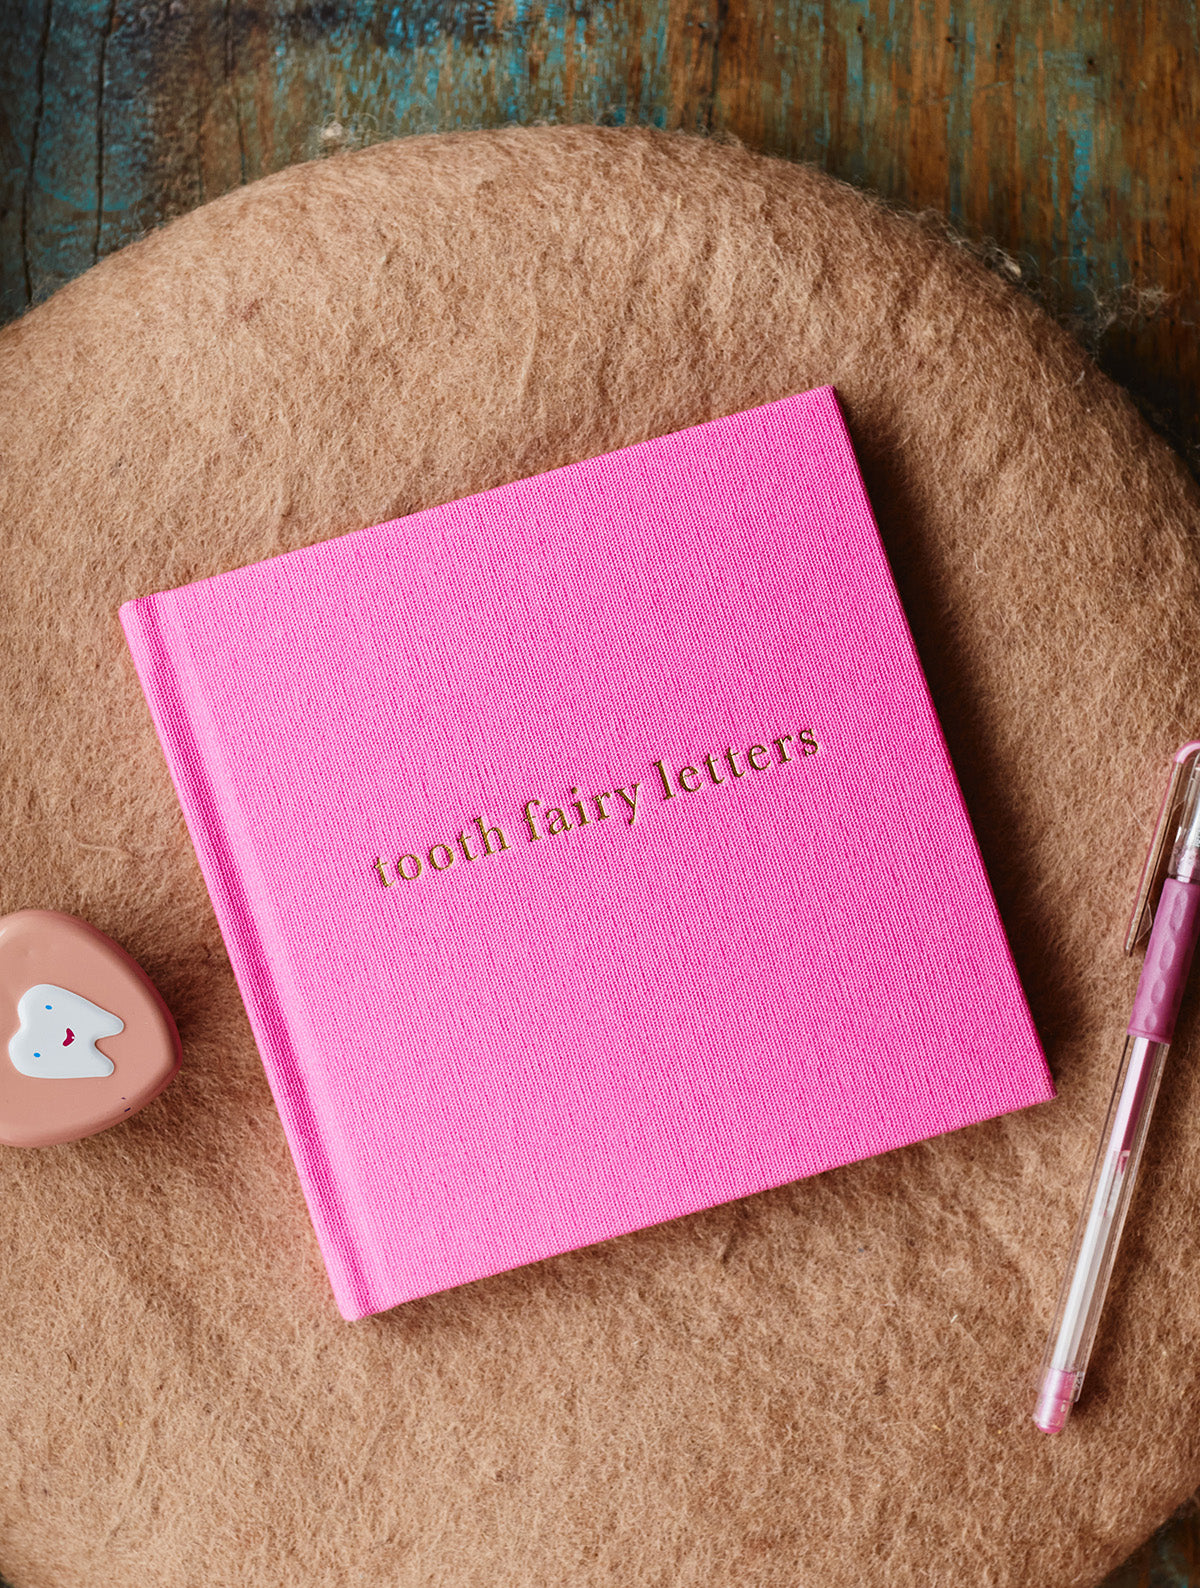 Write to Me | Tooth Fairy Letters - Journal